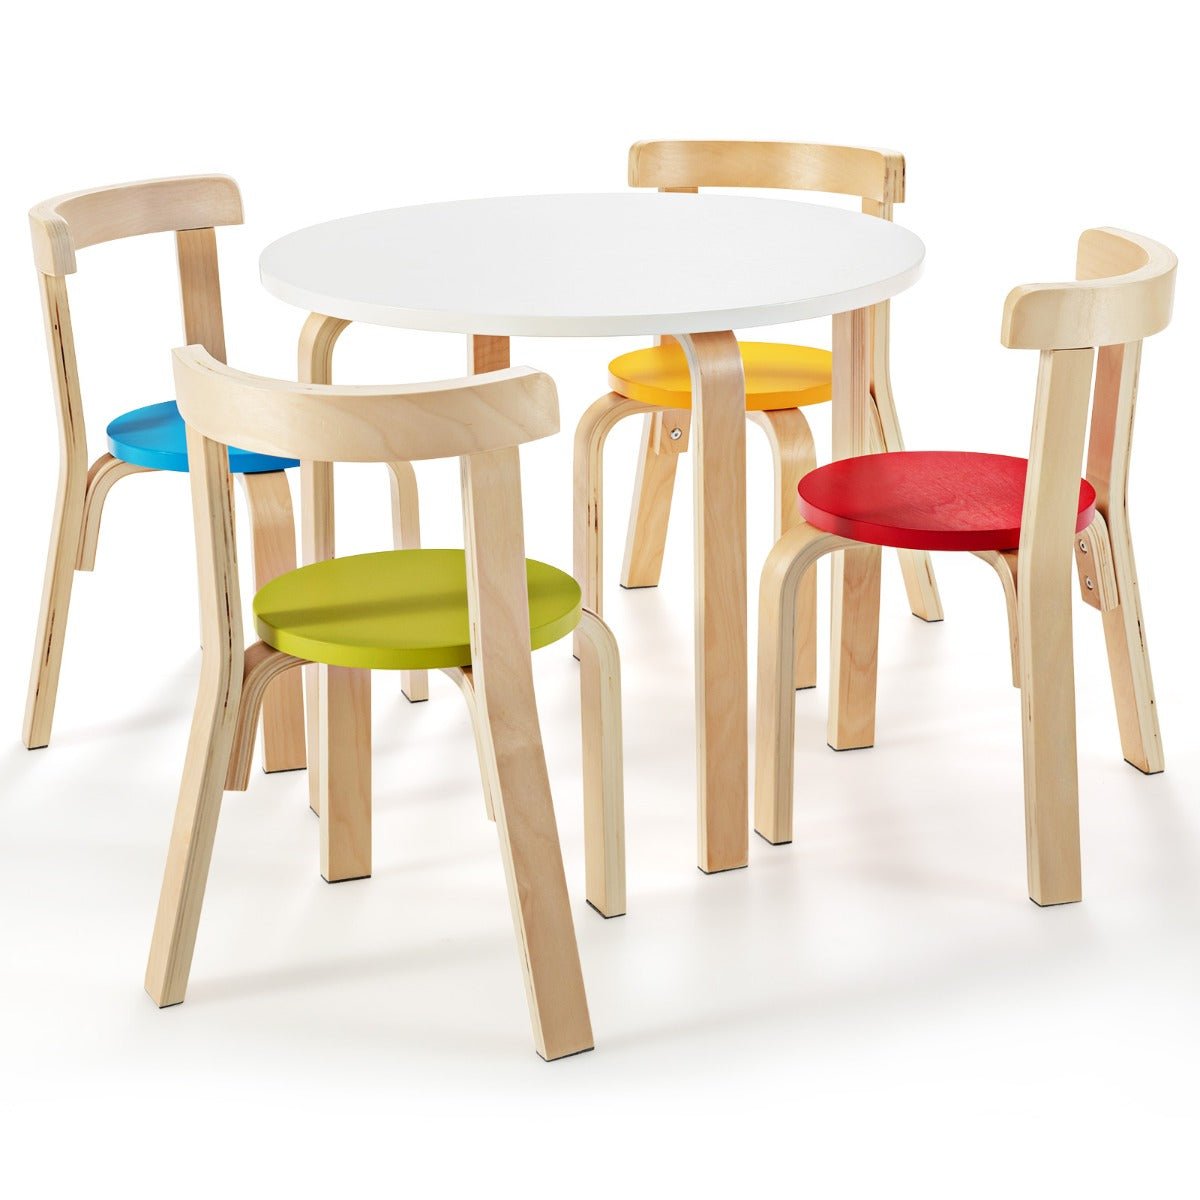 Shop 5 Pieces Wooden Kids Table and Chairs Set in Multi Colors